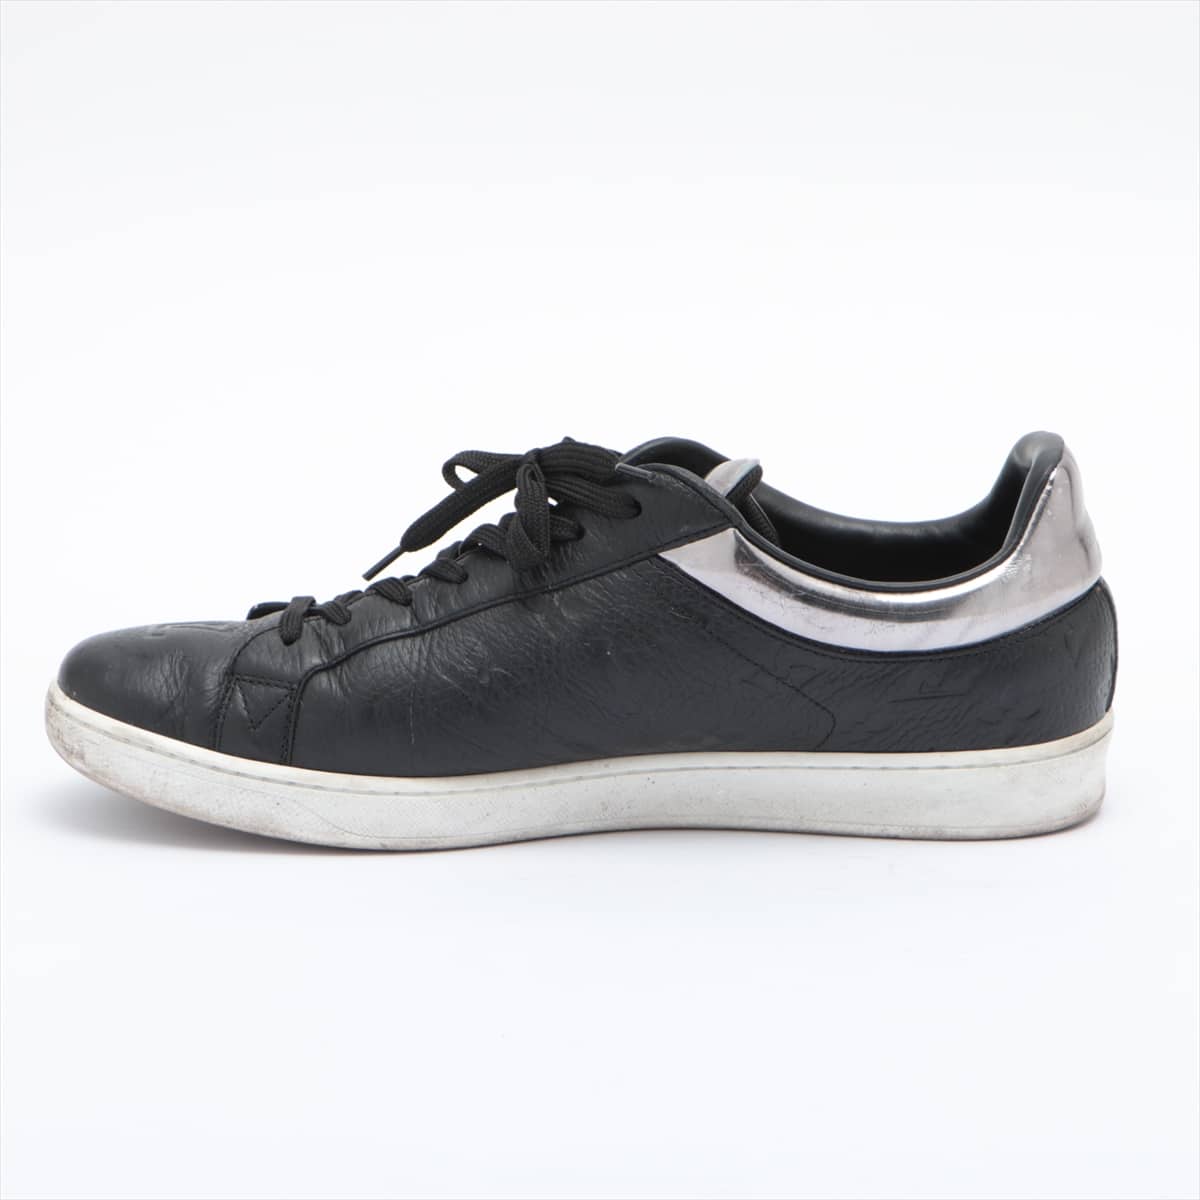 Louis Vuitton Luxembourg Line MS0230 Leather Sneakers 9 Men's Black